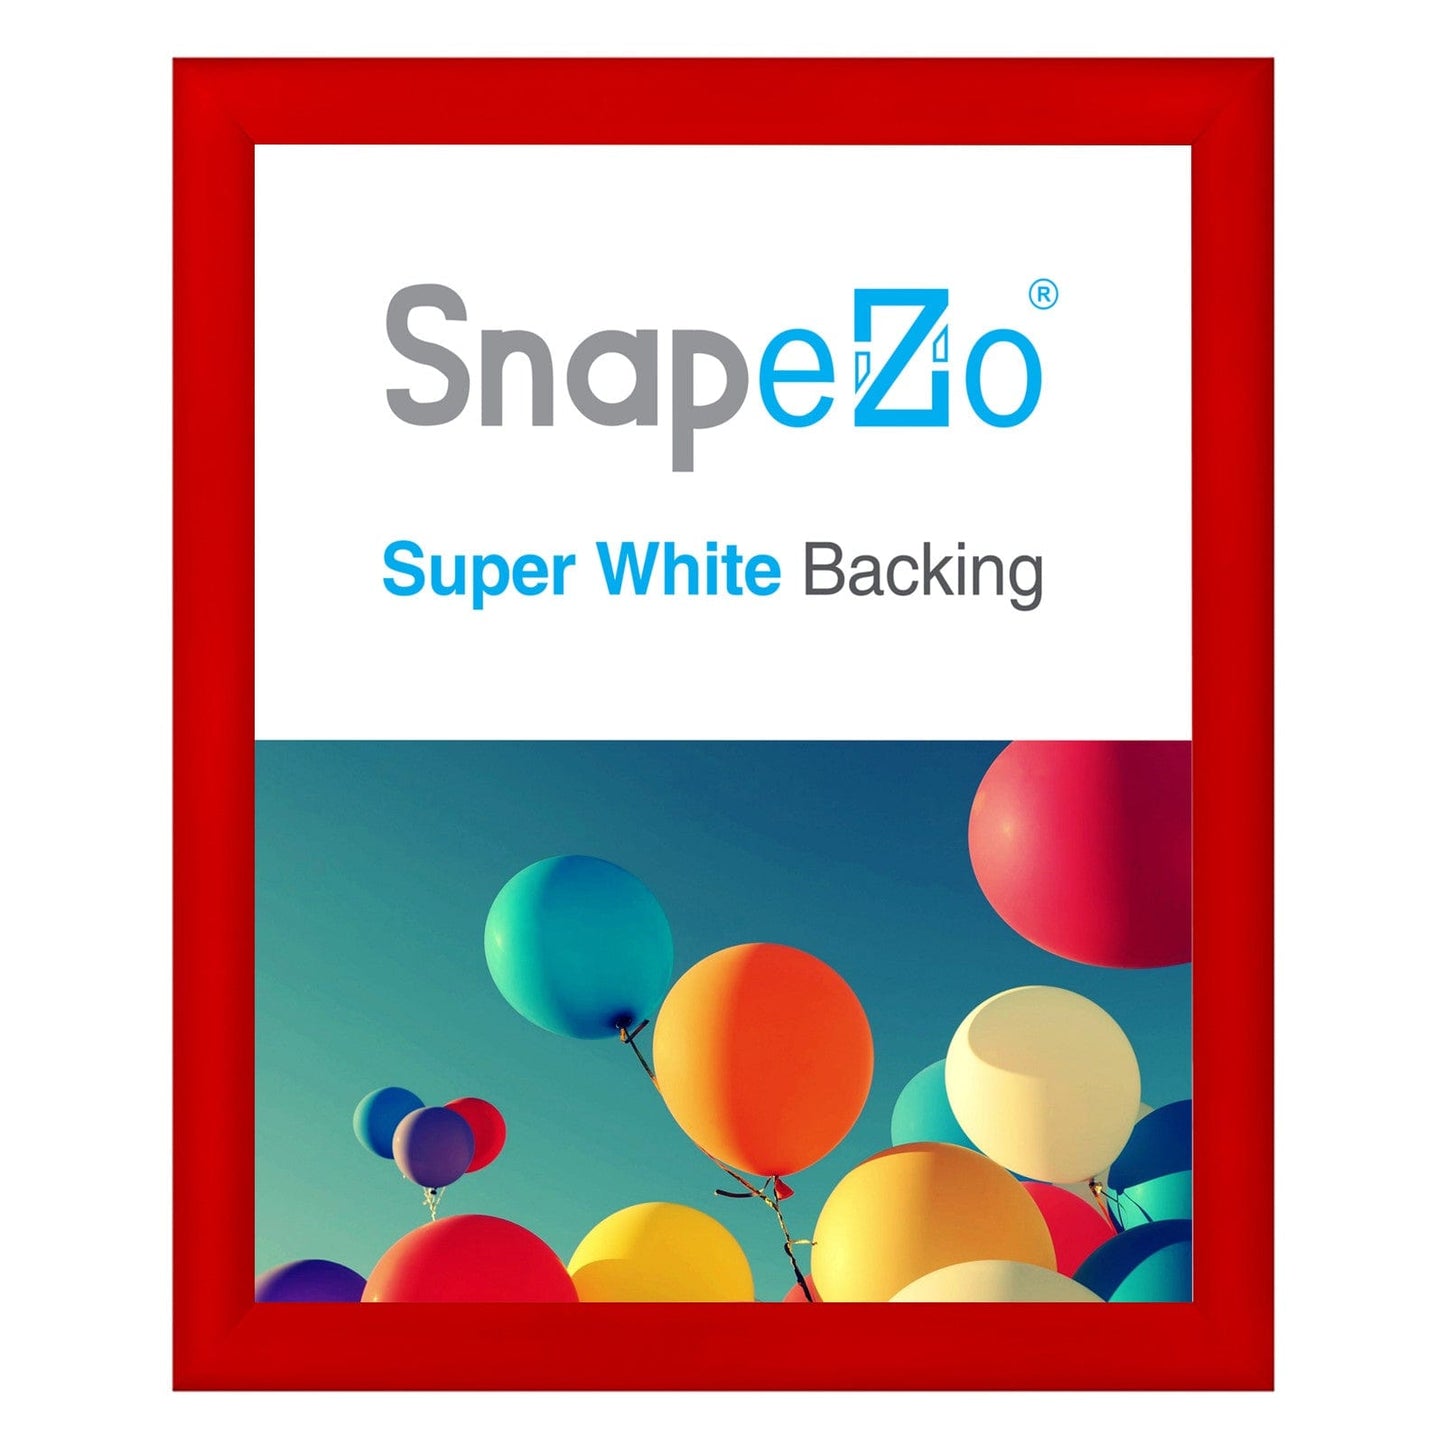 26x32 Red SnapeZo® Snap Frame - 1.2" Profile - Snap Frames Direct